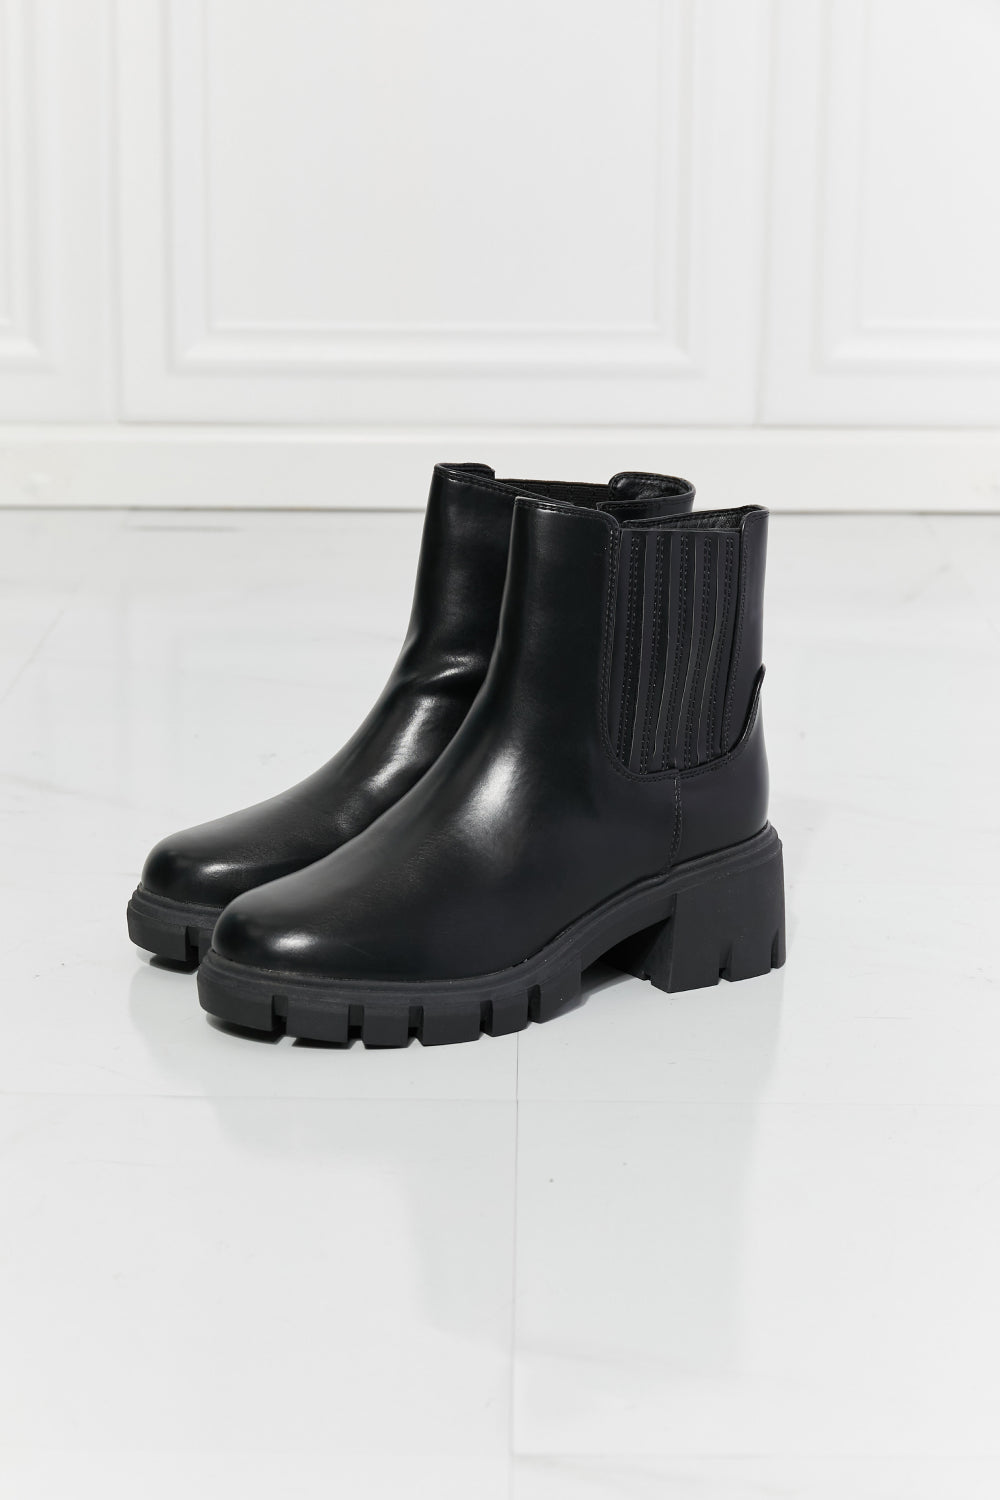 Lavender MMShoes What It Takes Lug Sole Chelsea Boots in Black Sentient Beauty Fashions shoes